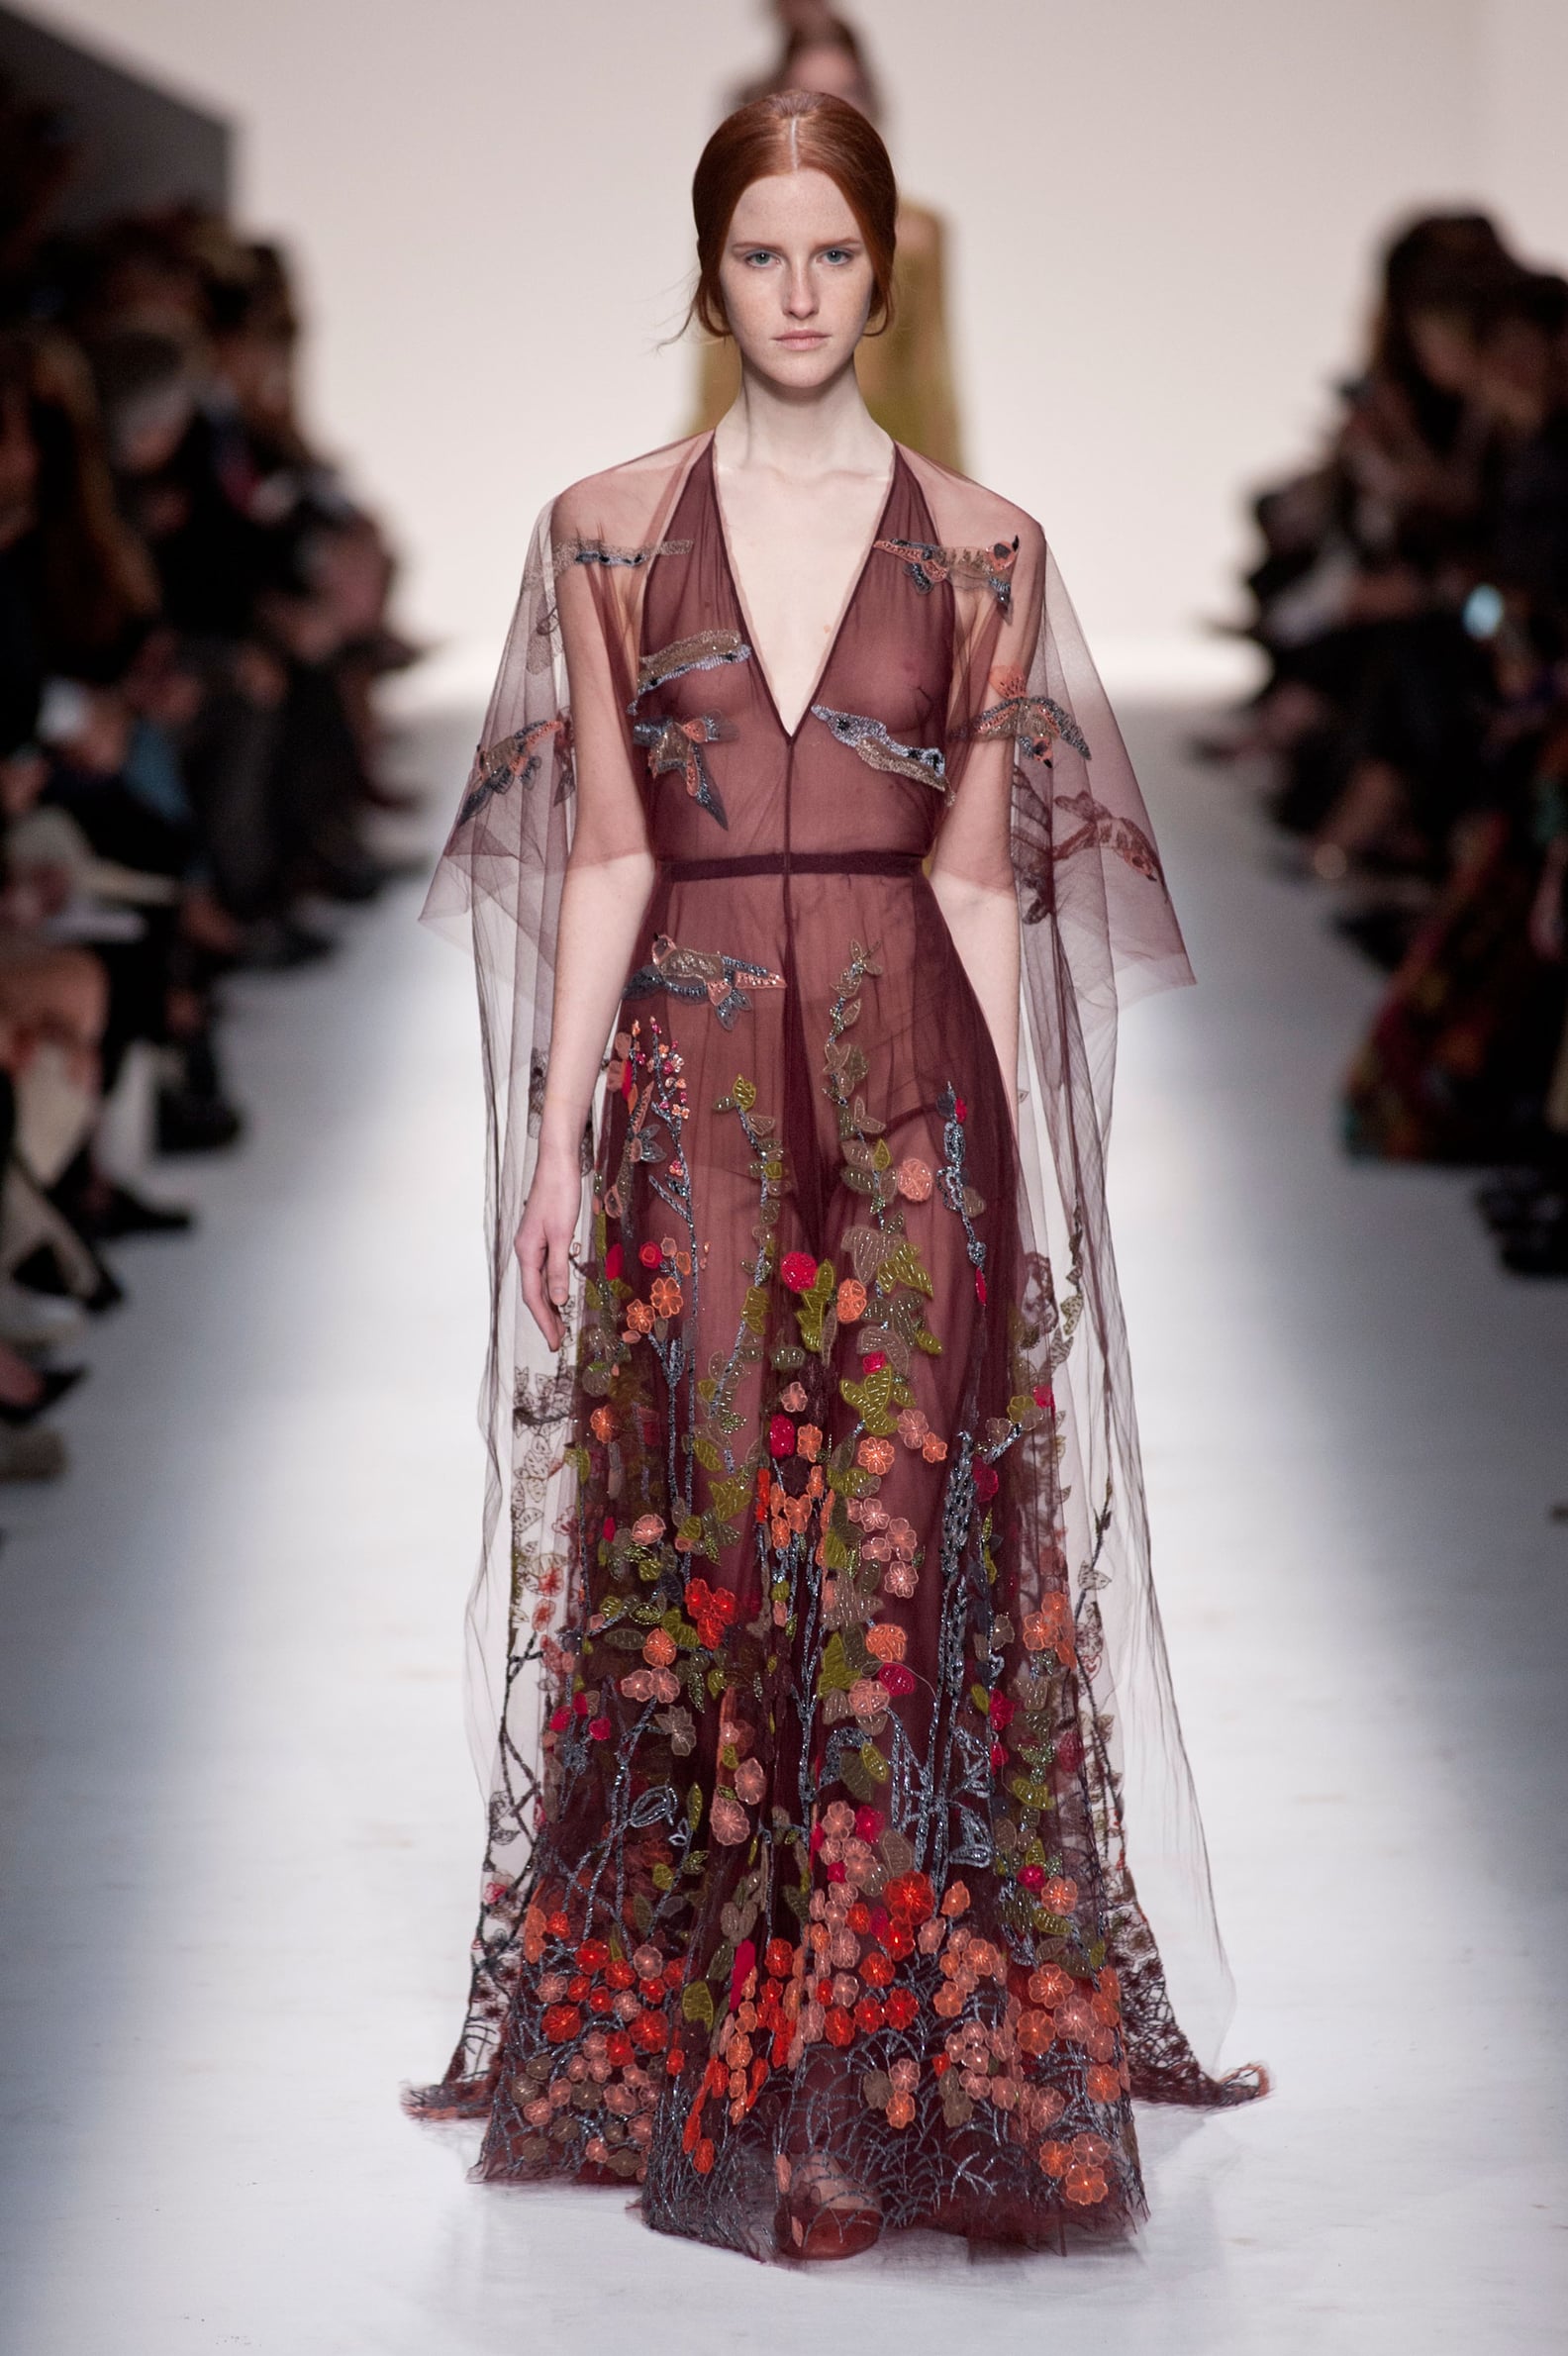 The Prettiest Dresses and Gowns From Fashion Week Fall 2014 | POPSUGAR ...